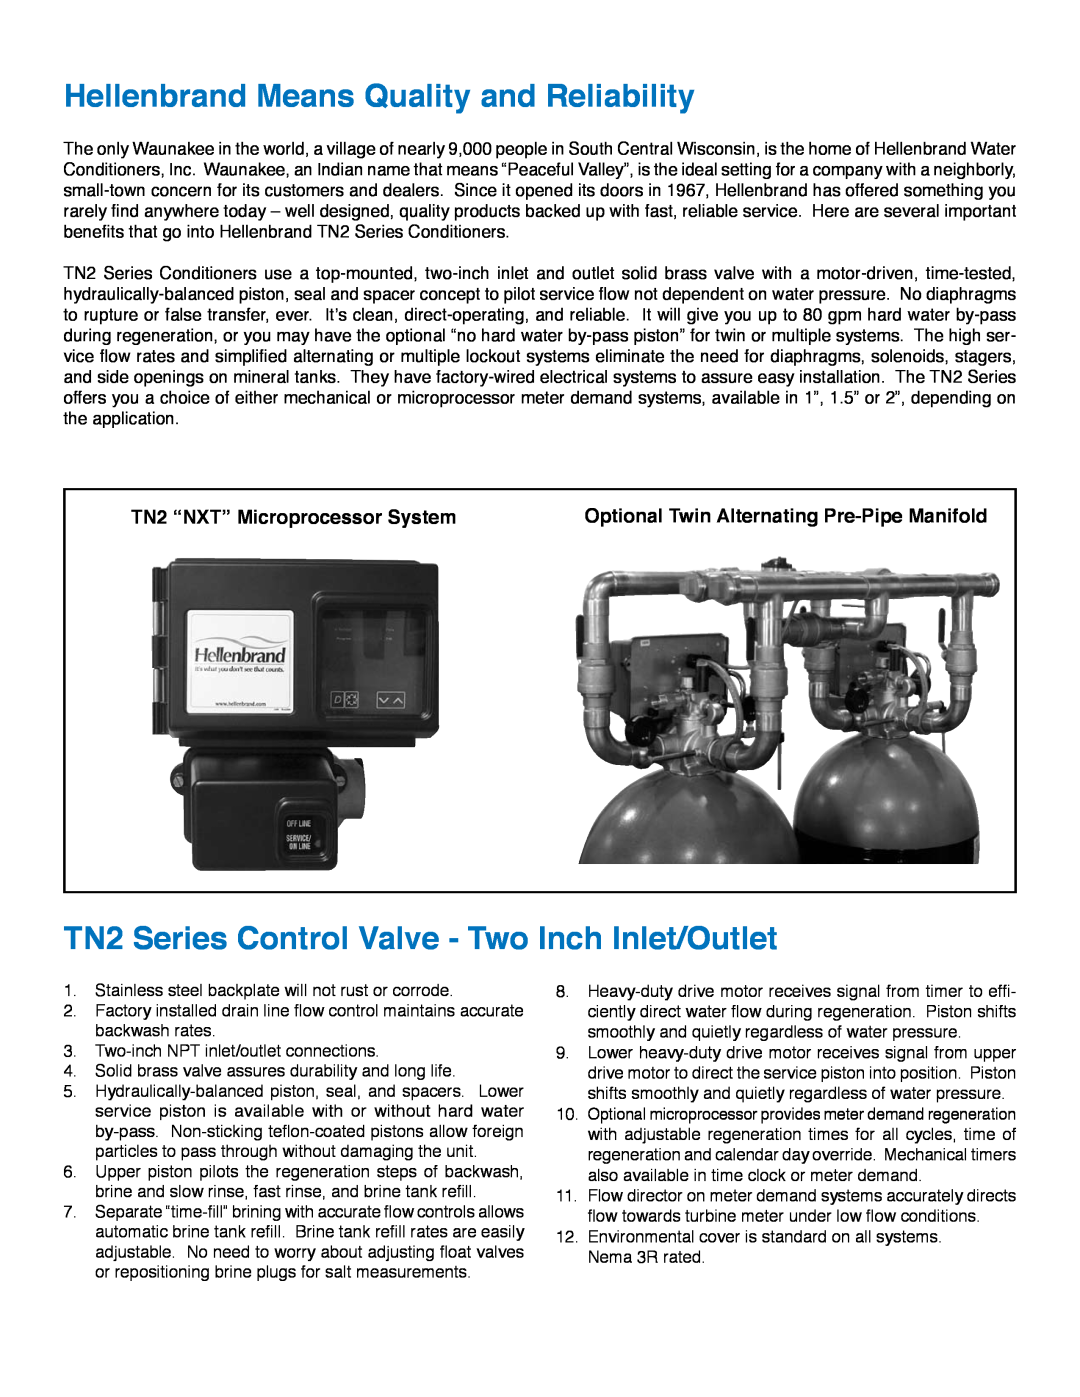 Hellenbrand manual Hellenbrand Means Quality and Reliability, TN2 Series Control Valve - Two Inch Inlet/Outlet 